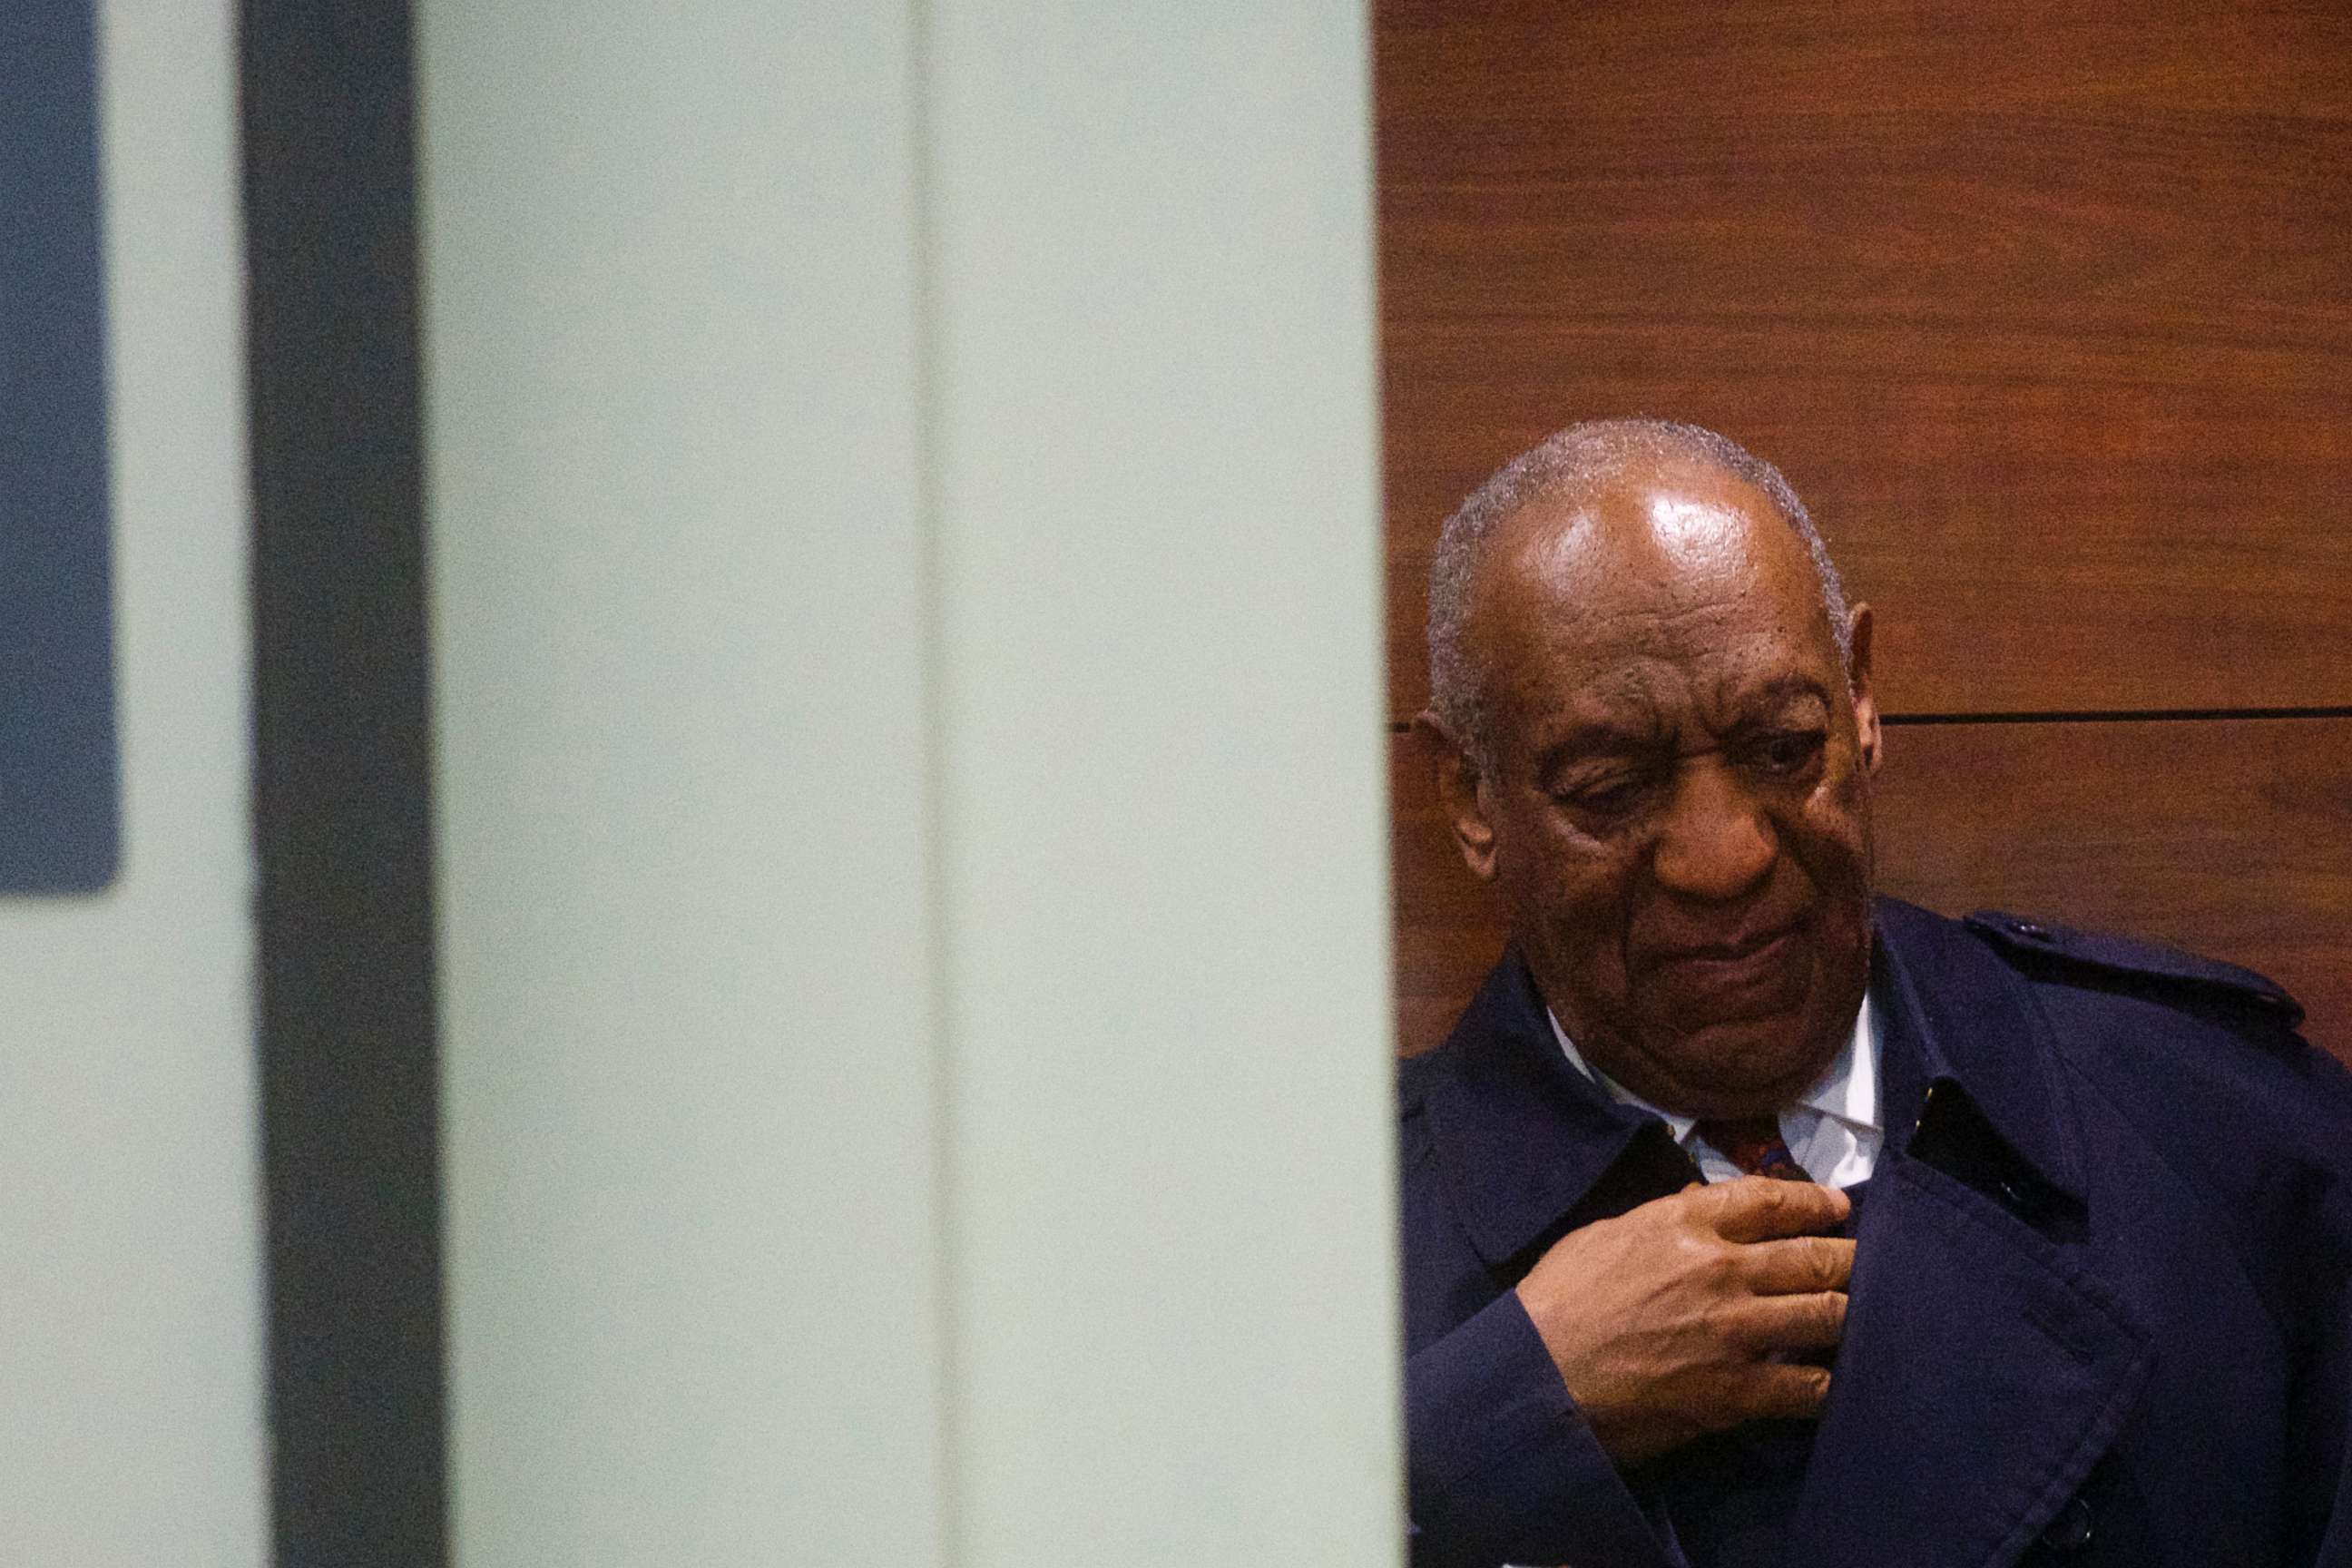 PHOTO: Bill Cosby departs the Montgomery County Courthouse after day fourteen of his sexual assault retrial, April 19, 2018, in Norristown, Penn.